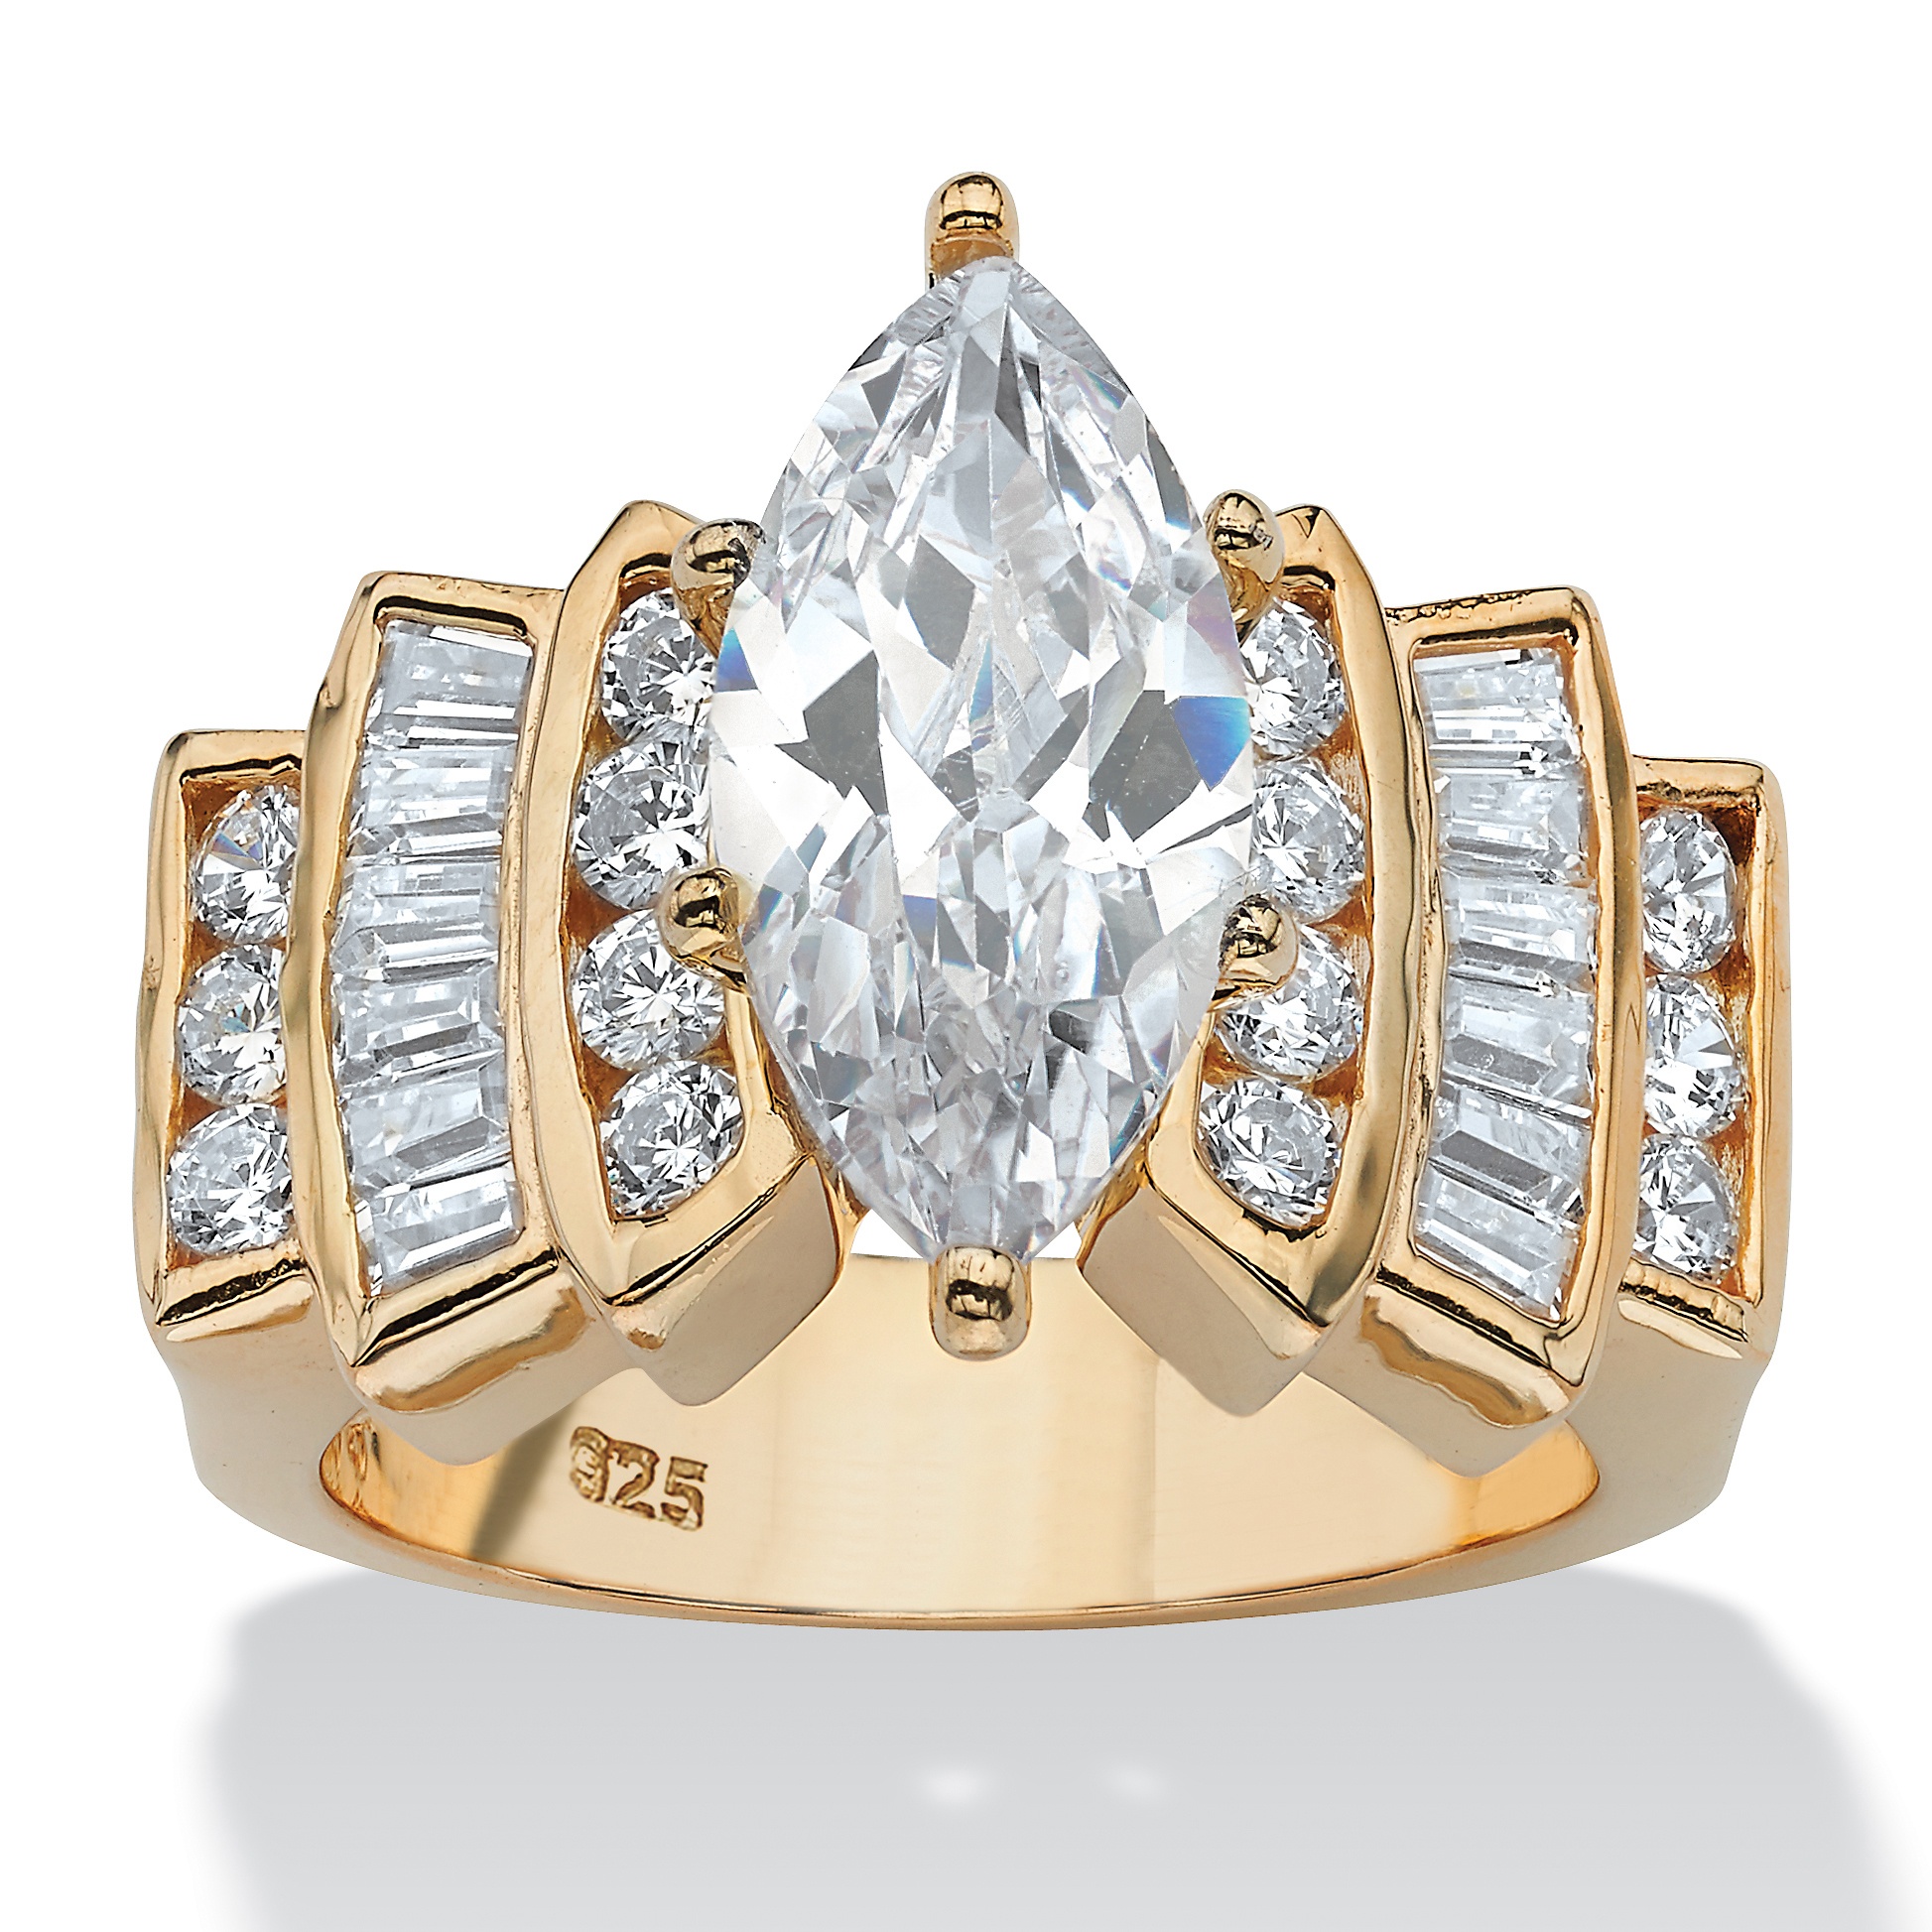 3.63 TCW Marquise-Cut and Round Cubic Zirconia Ring in 14k Gold over ...